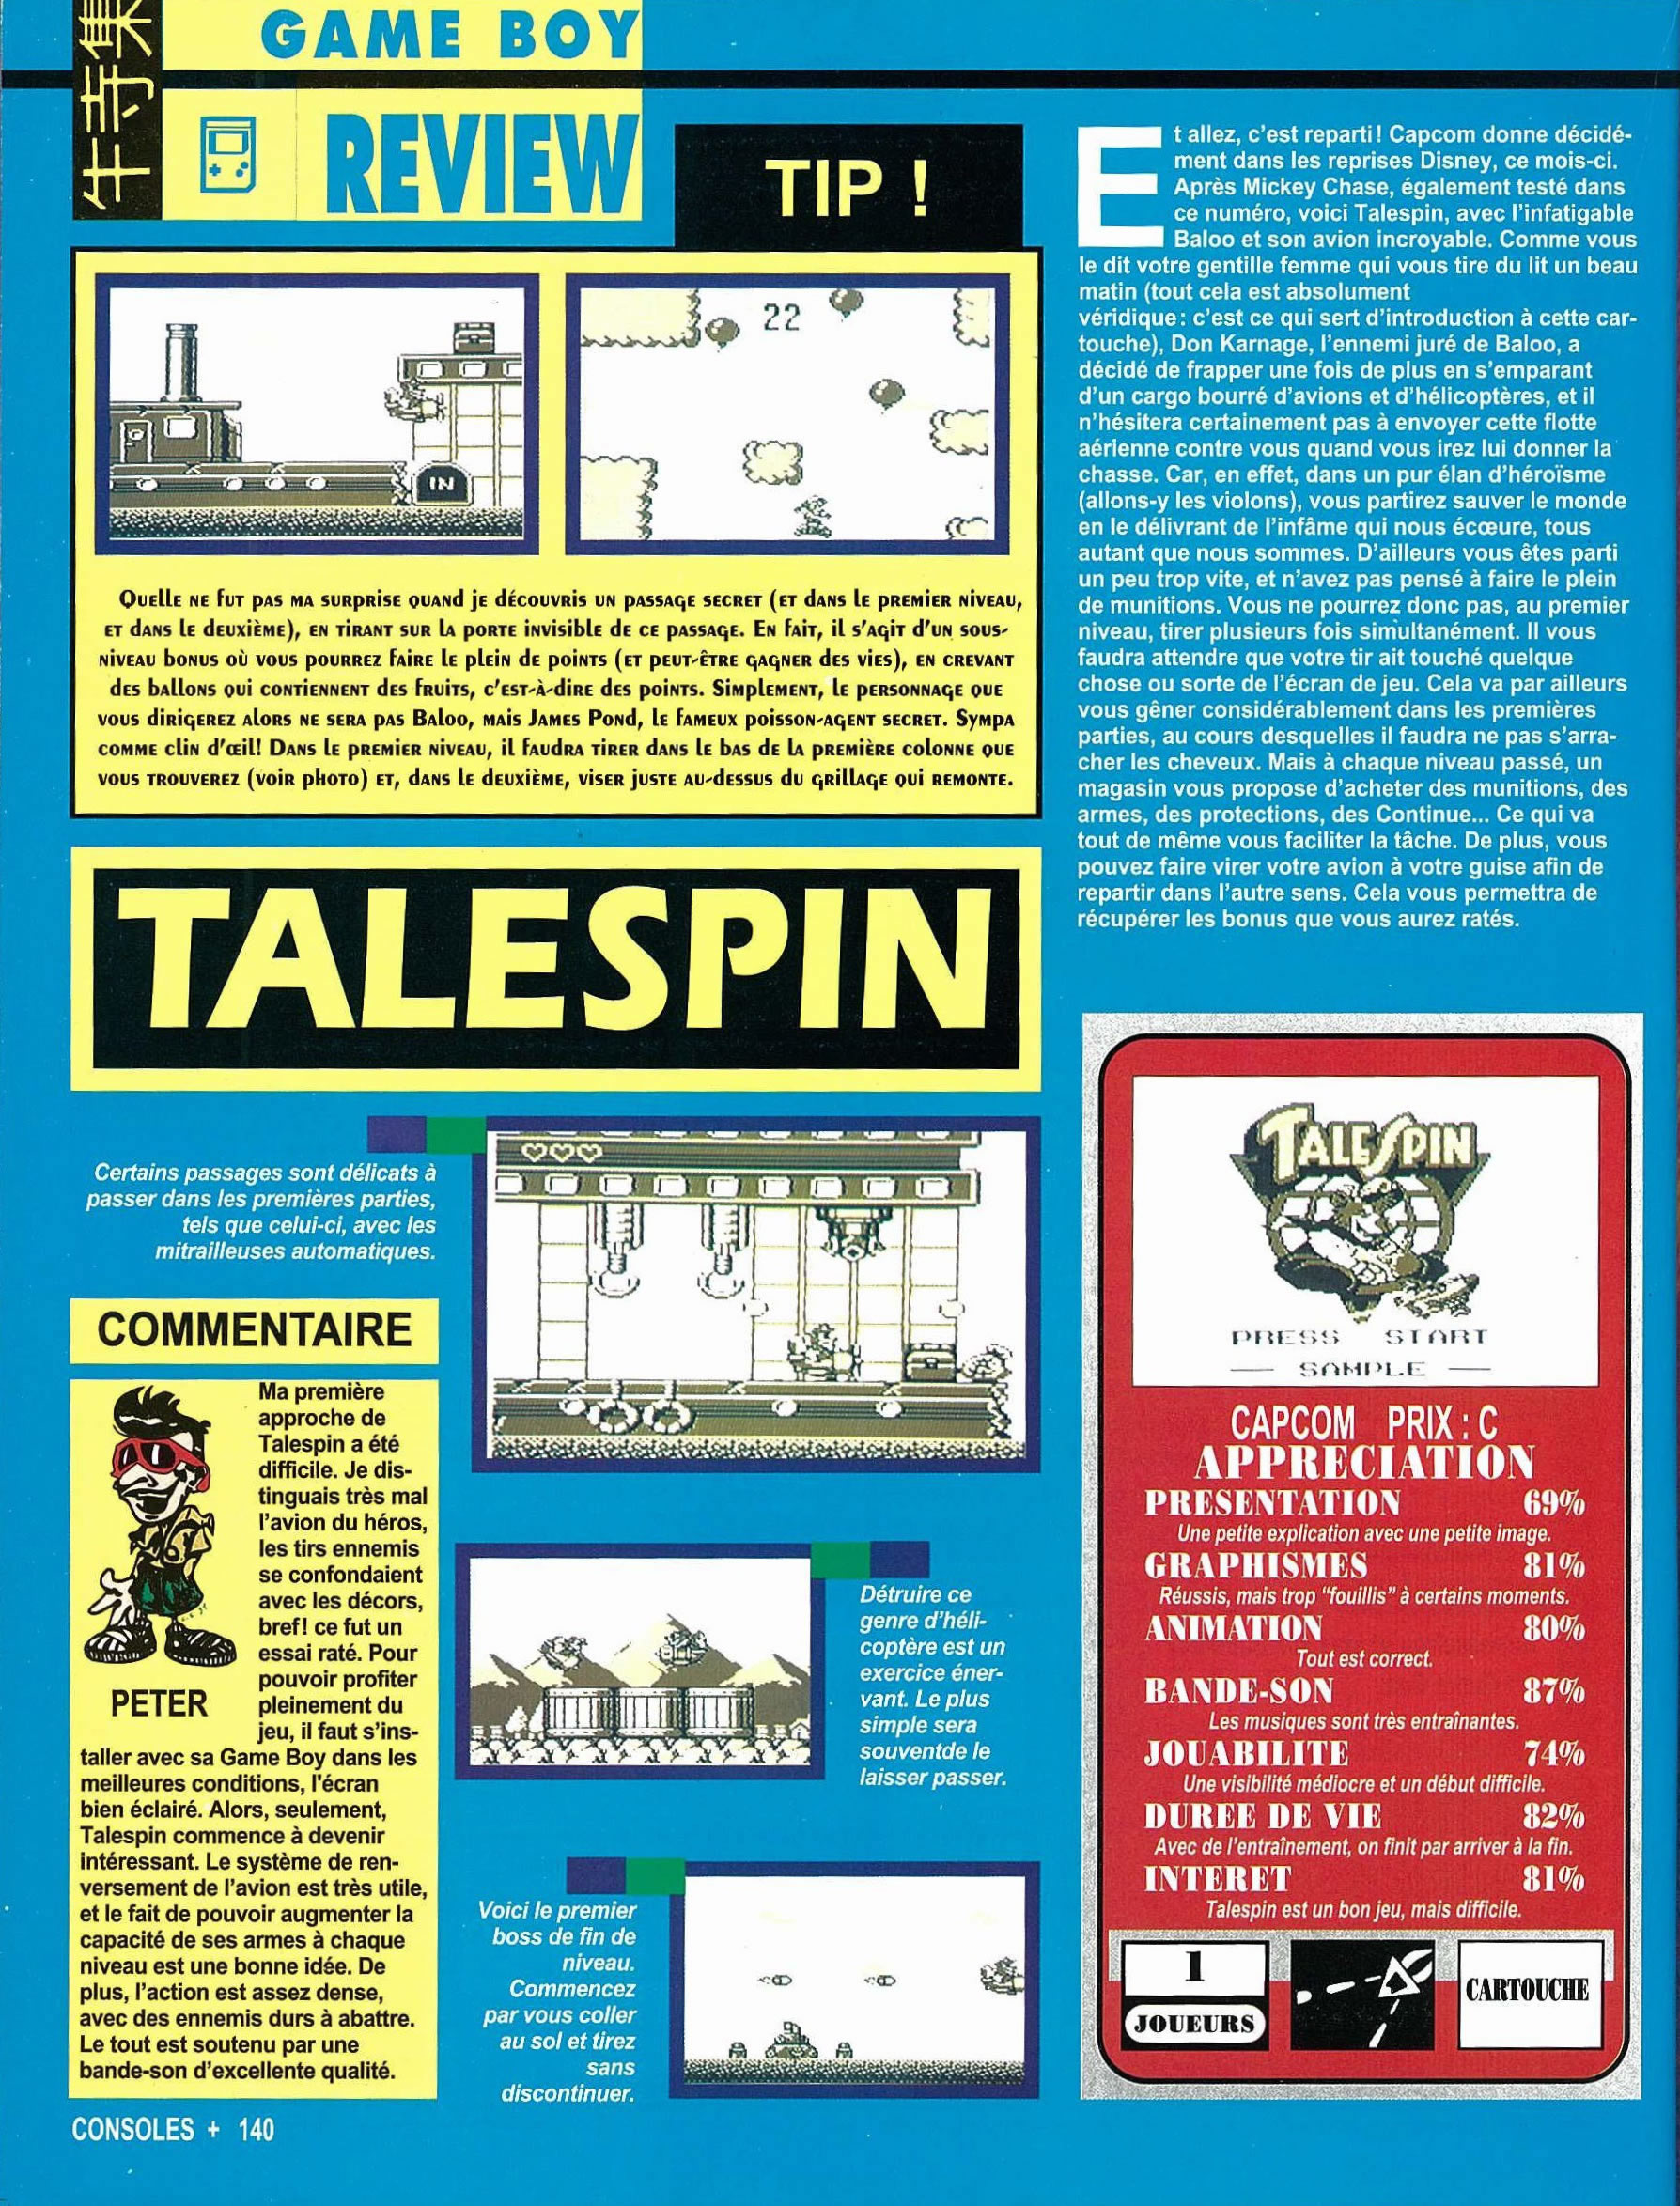 tests//1494/Consoles + 020 - Page 140 (mai 1993).jpg